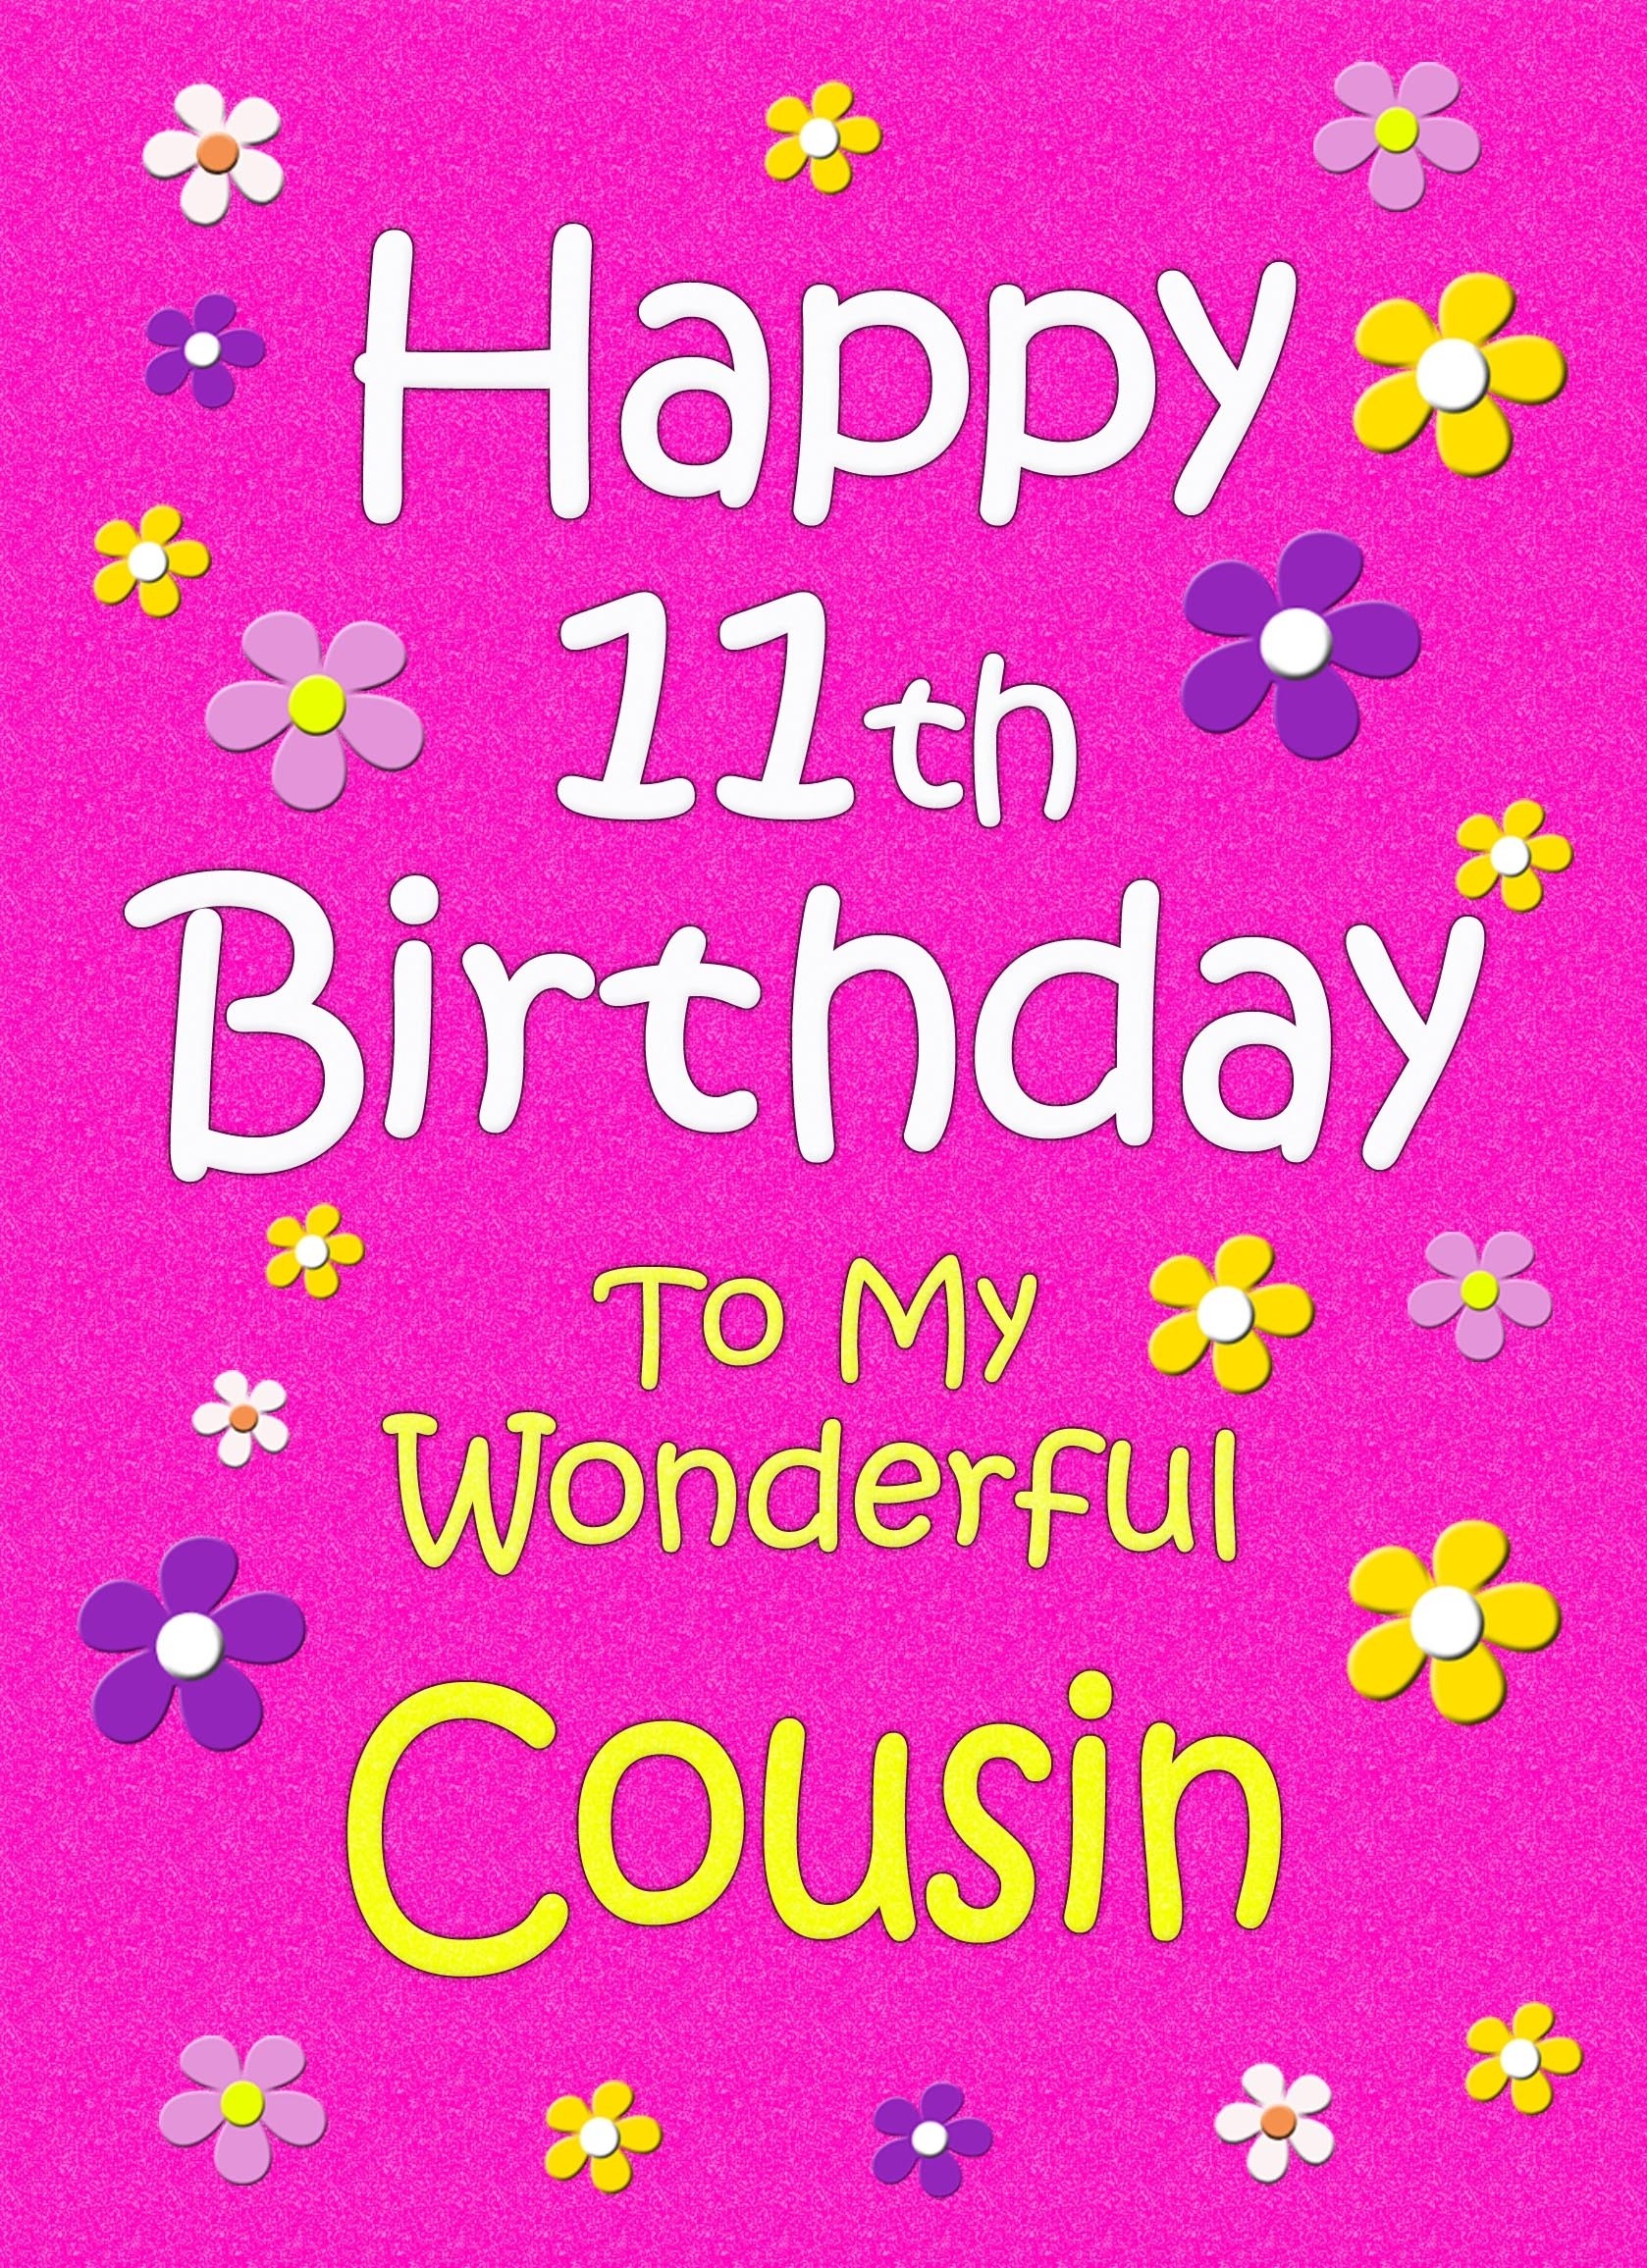 Cousin 11th Birthday Card (Pink)